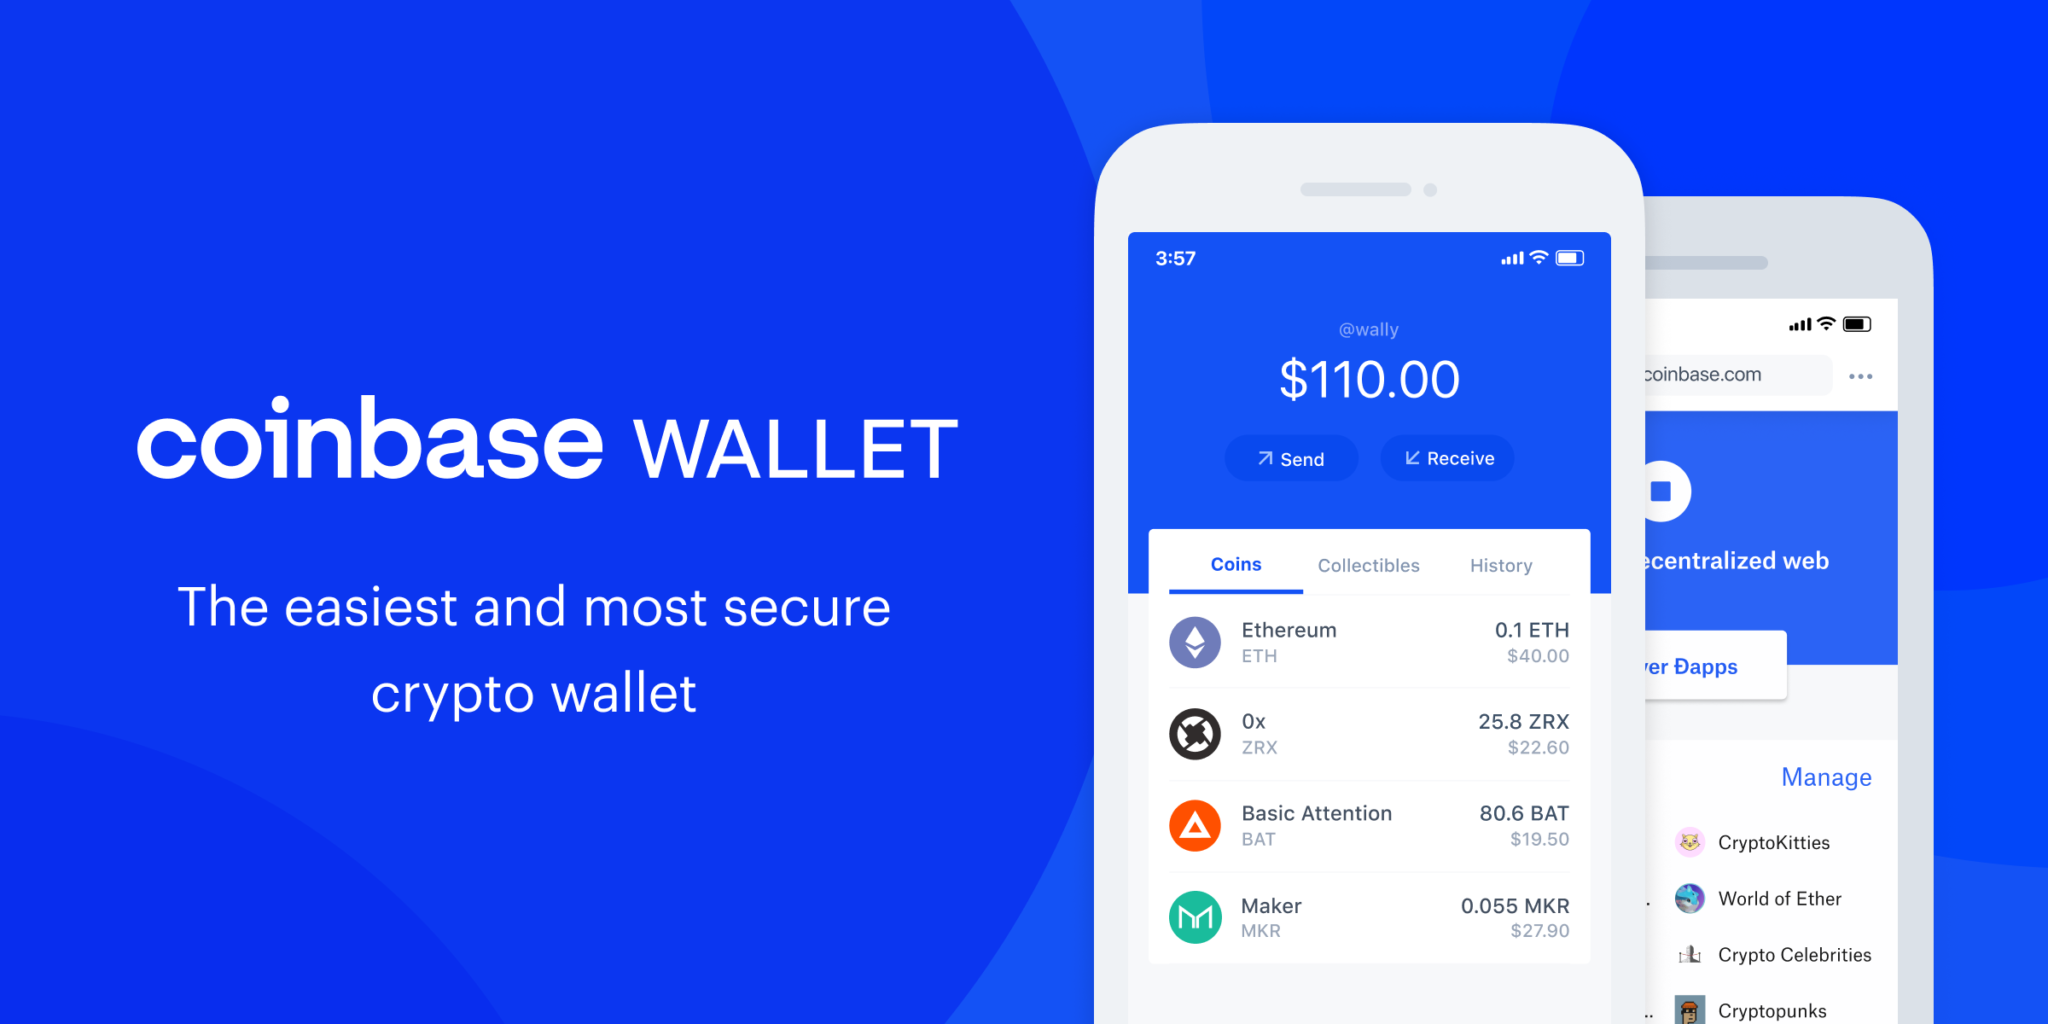 can i receive any crypto coin in wallet